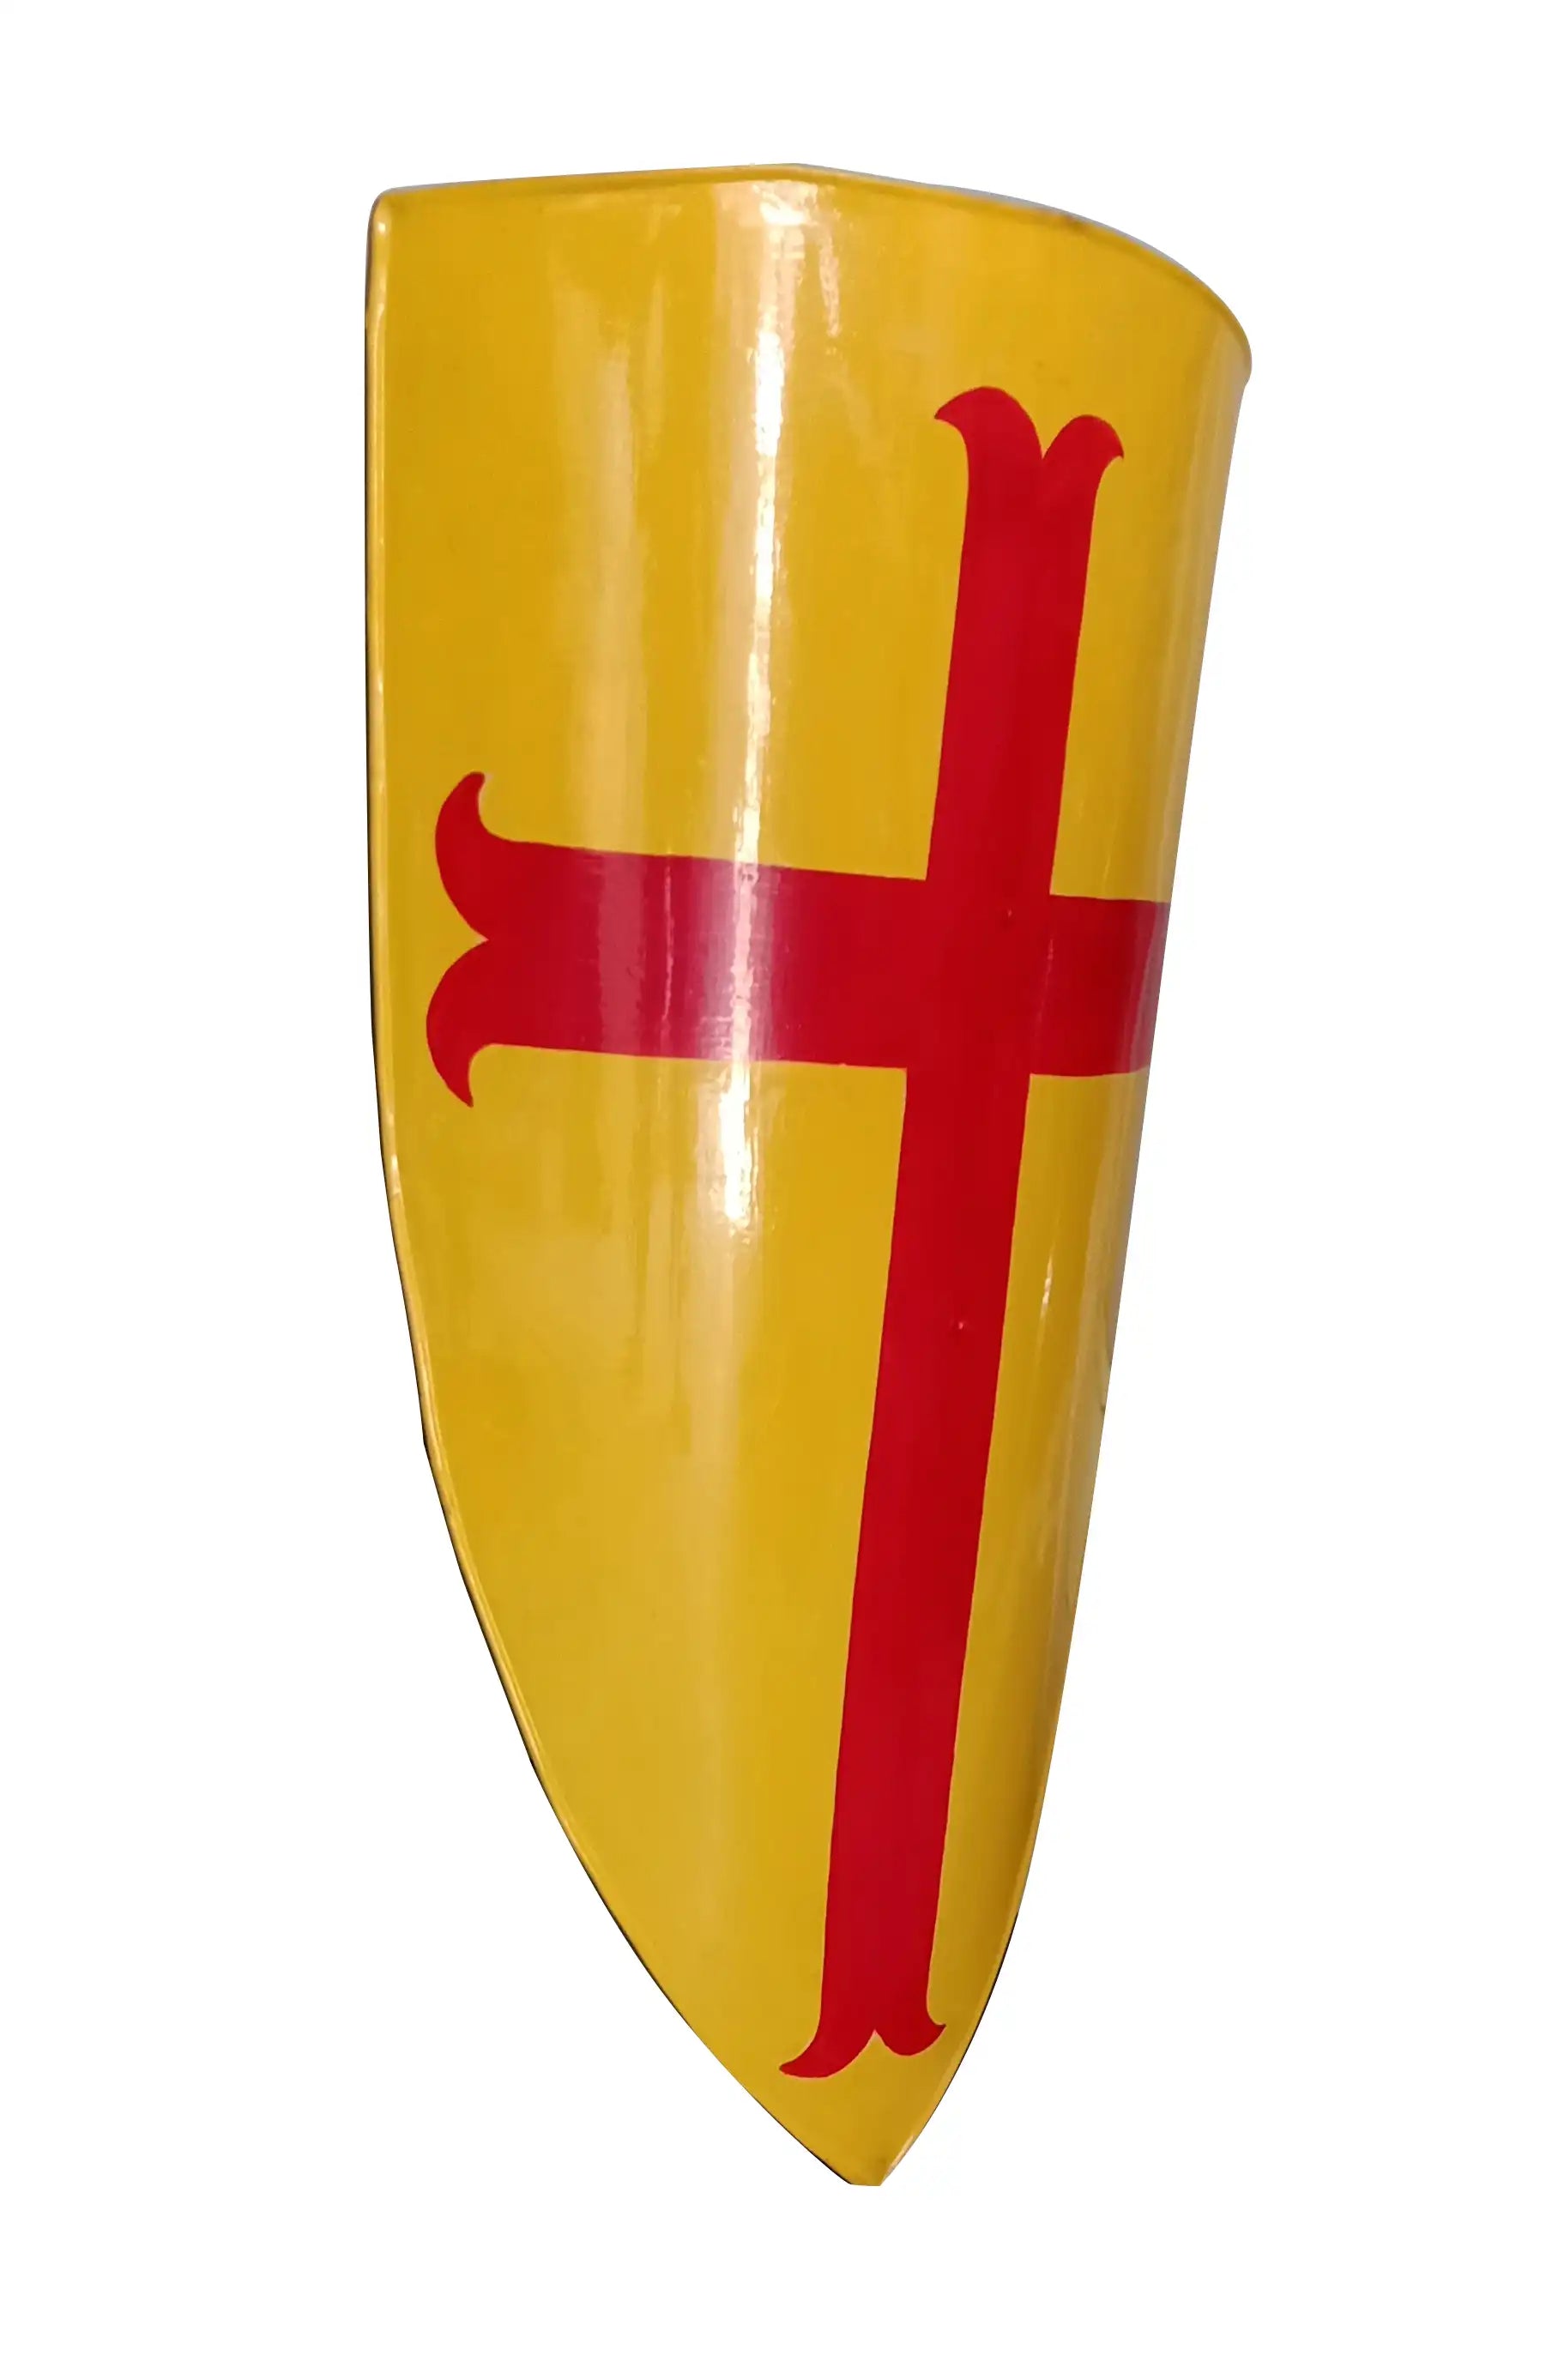 Medieval 13th century Red Cross Knights Crusader Heater Combat Yellow Ready For Combat Shield